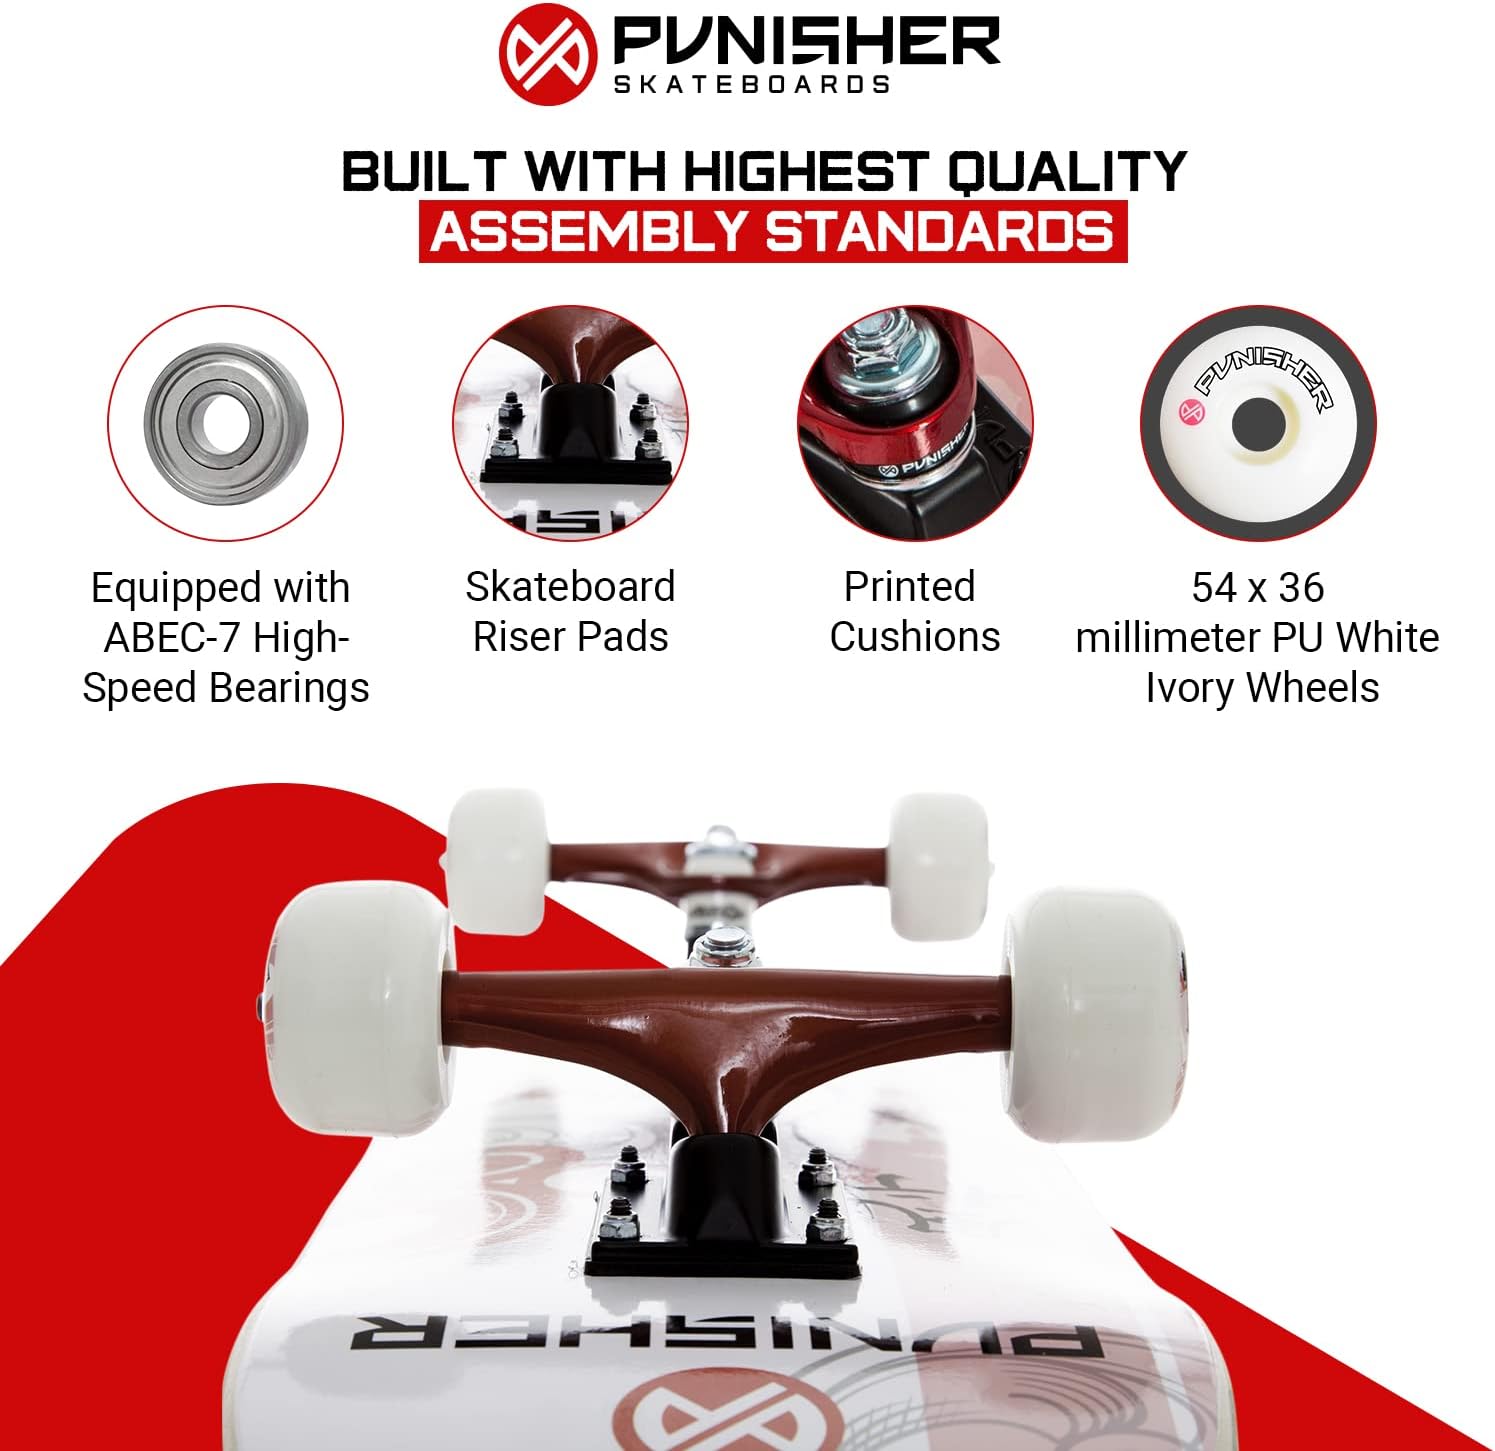 Punisher Girls Skateboard Complete with 31.5 x 7.75 Double Kick Concave Deck Canadian Maple ABEC-7 Bearings